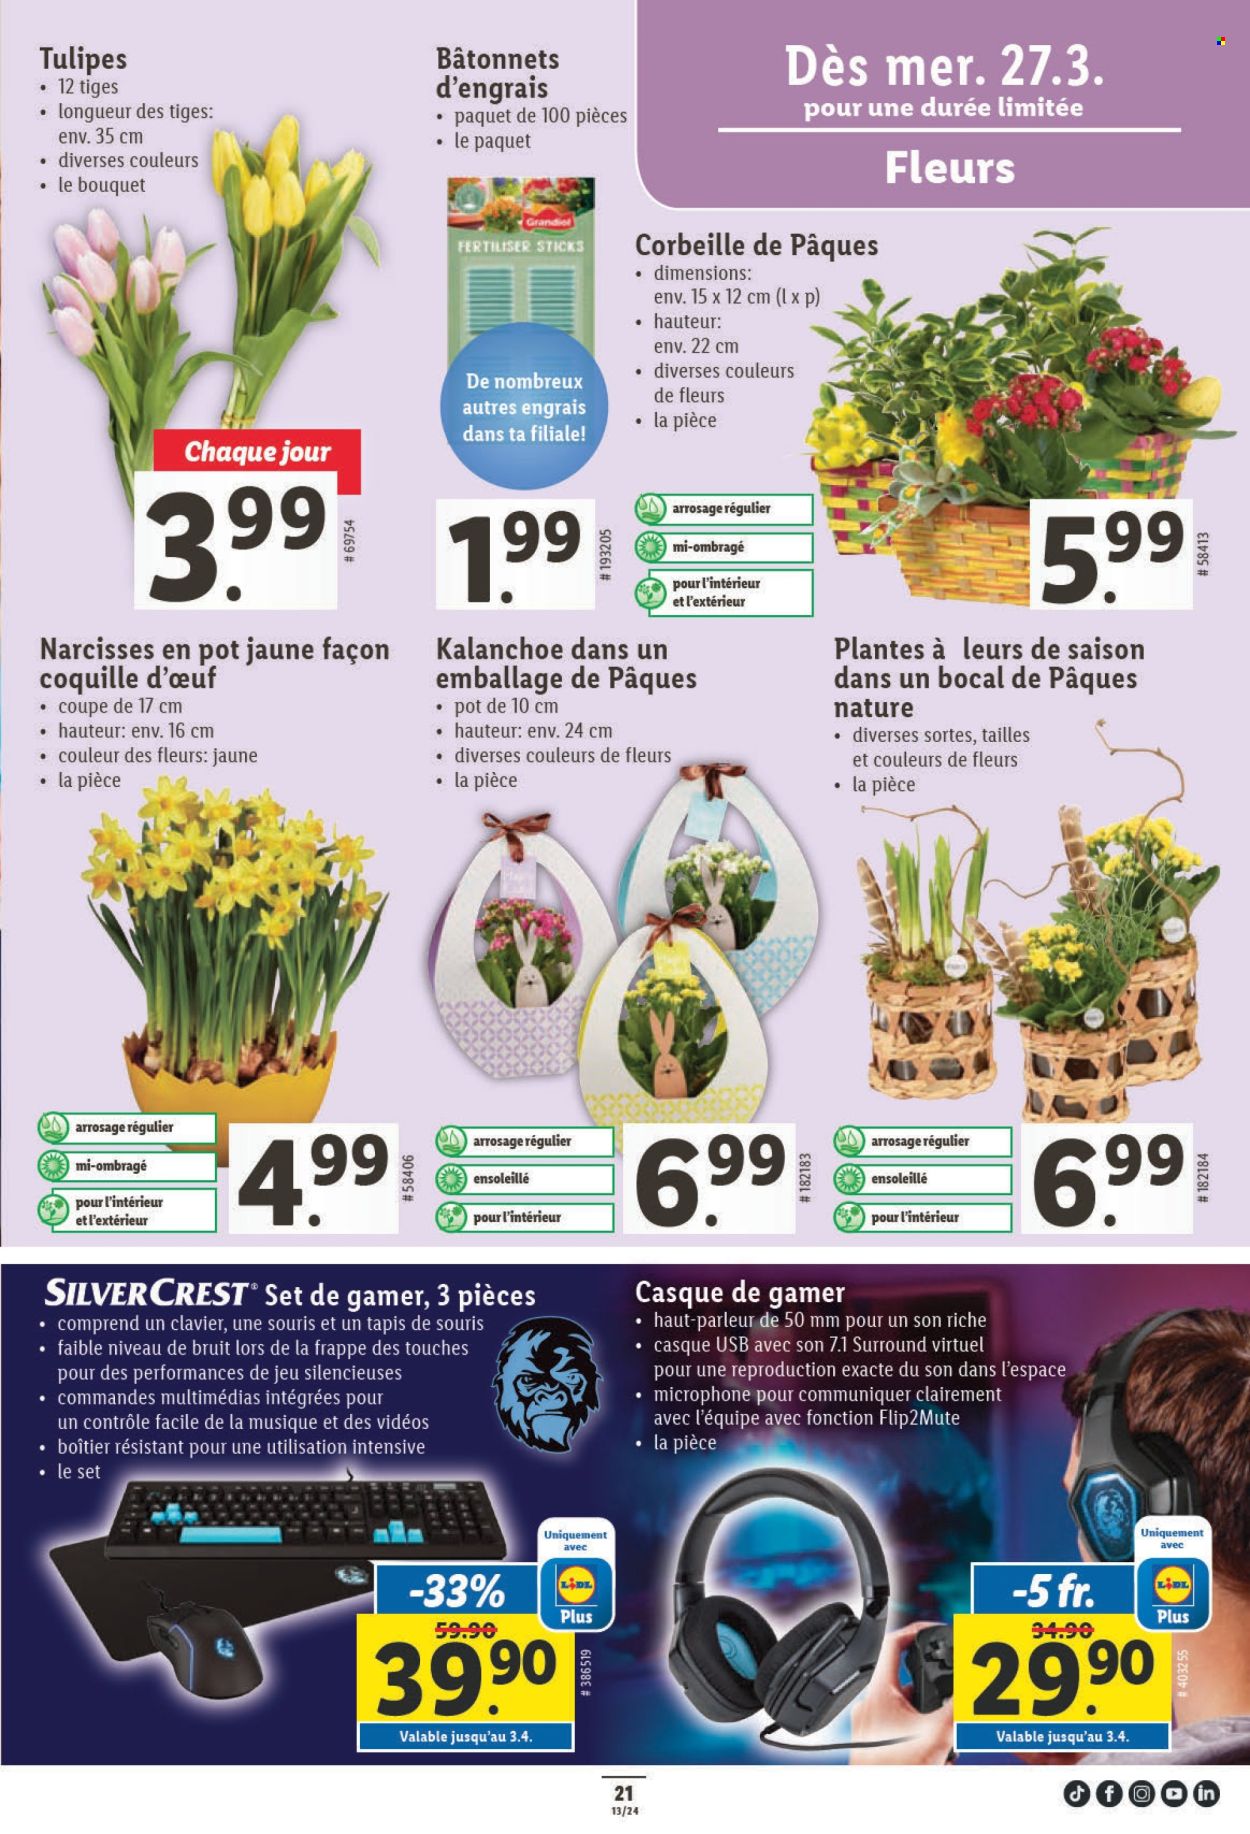 Catalogue Lidl - 27.3.2024 - 3.4.2024. Page 21.